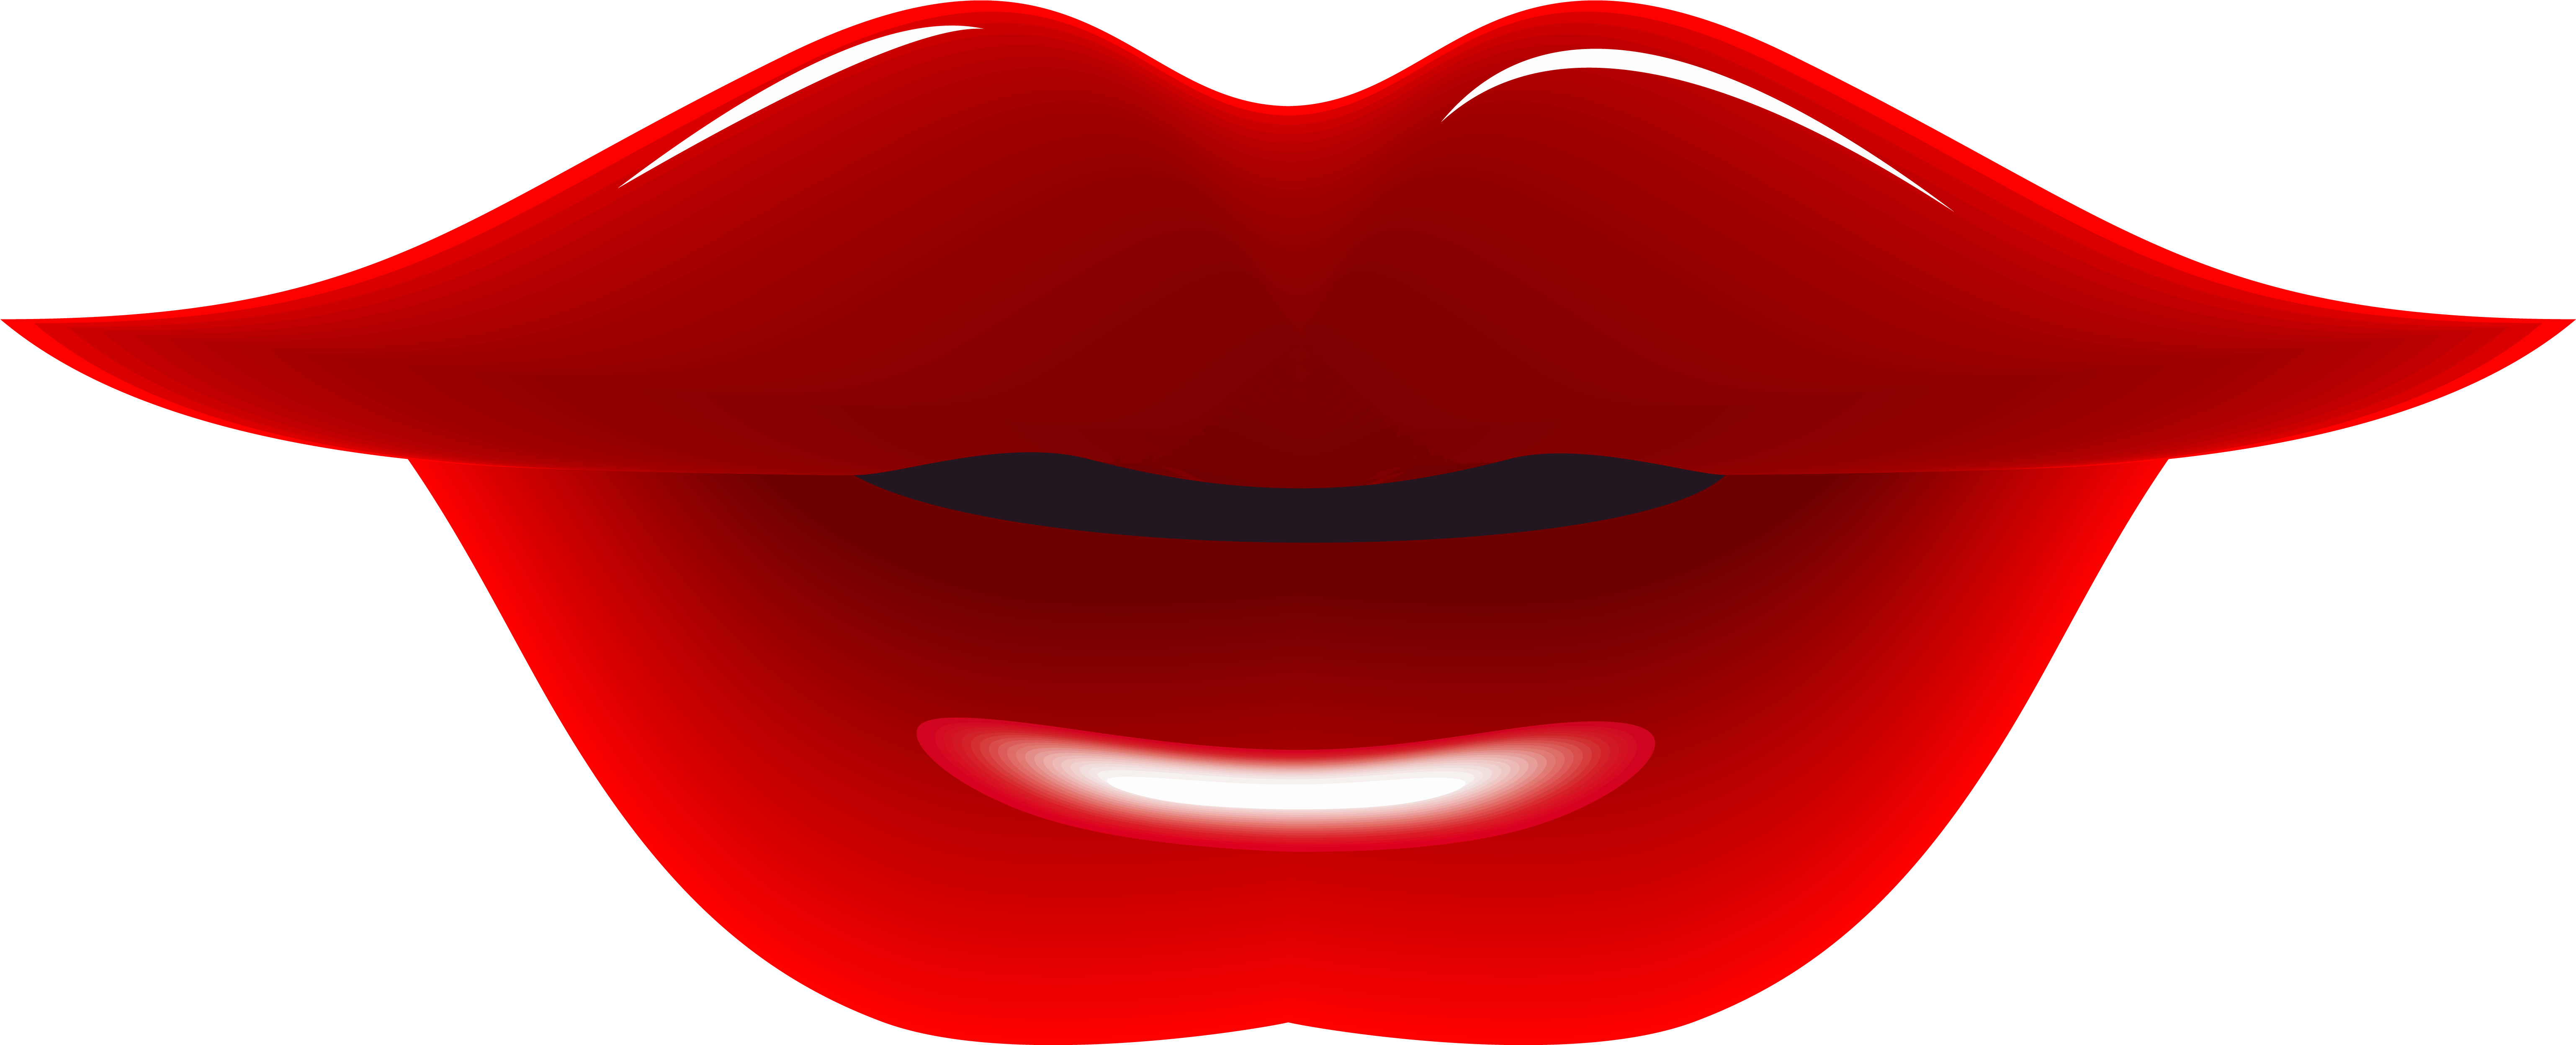 Neoteric Design Lips Clipart Mouth Png Clip Art Best - Neoteric Design Lips Clipart Mouth Png Clip Art Best (6248x2609)